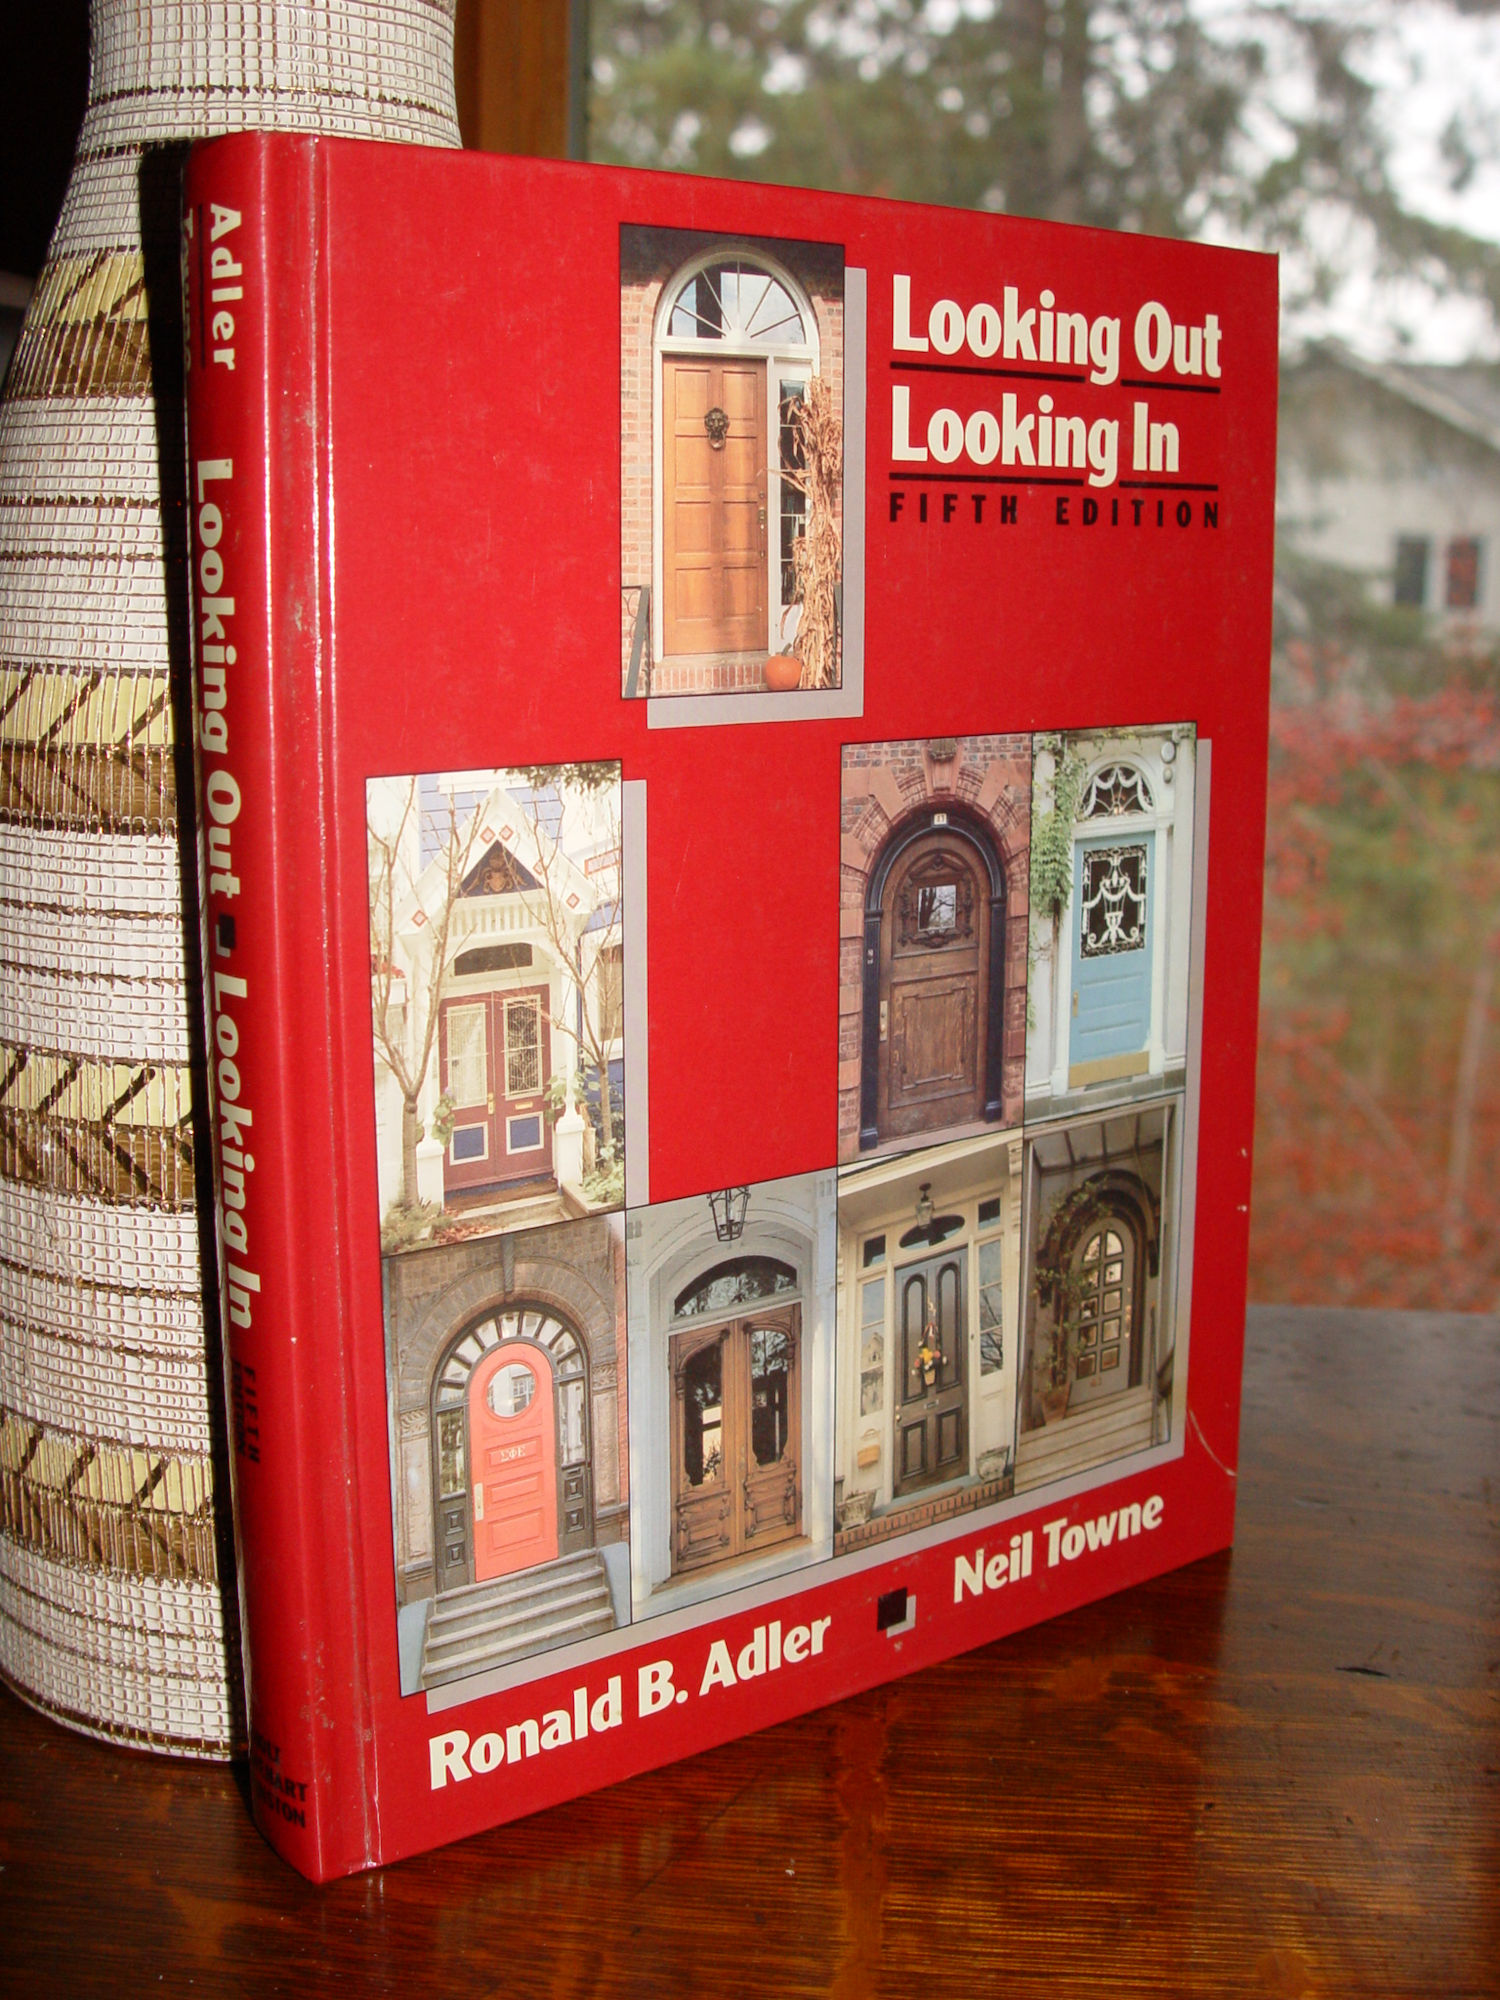 Looking Out Looking In by Ronald B. Adler
                        5th edition 1987